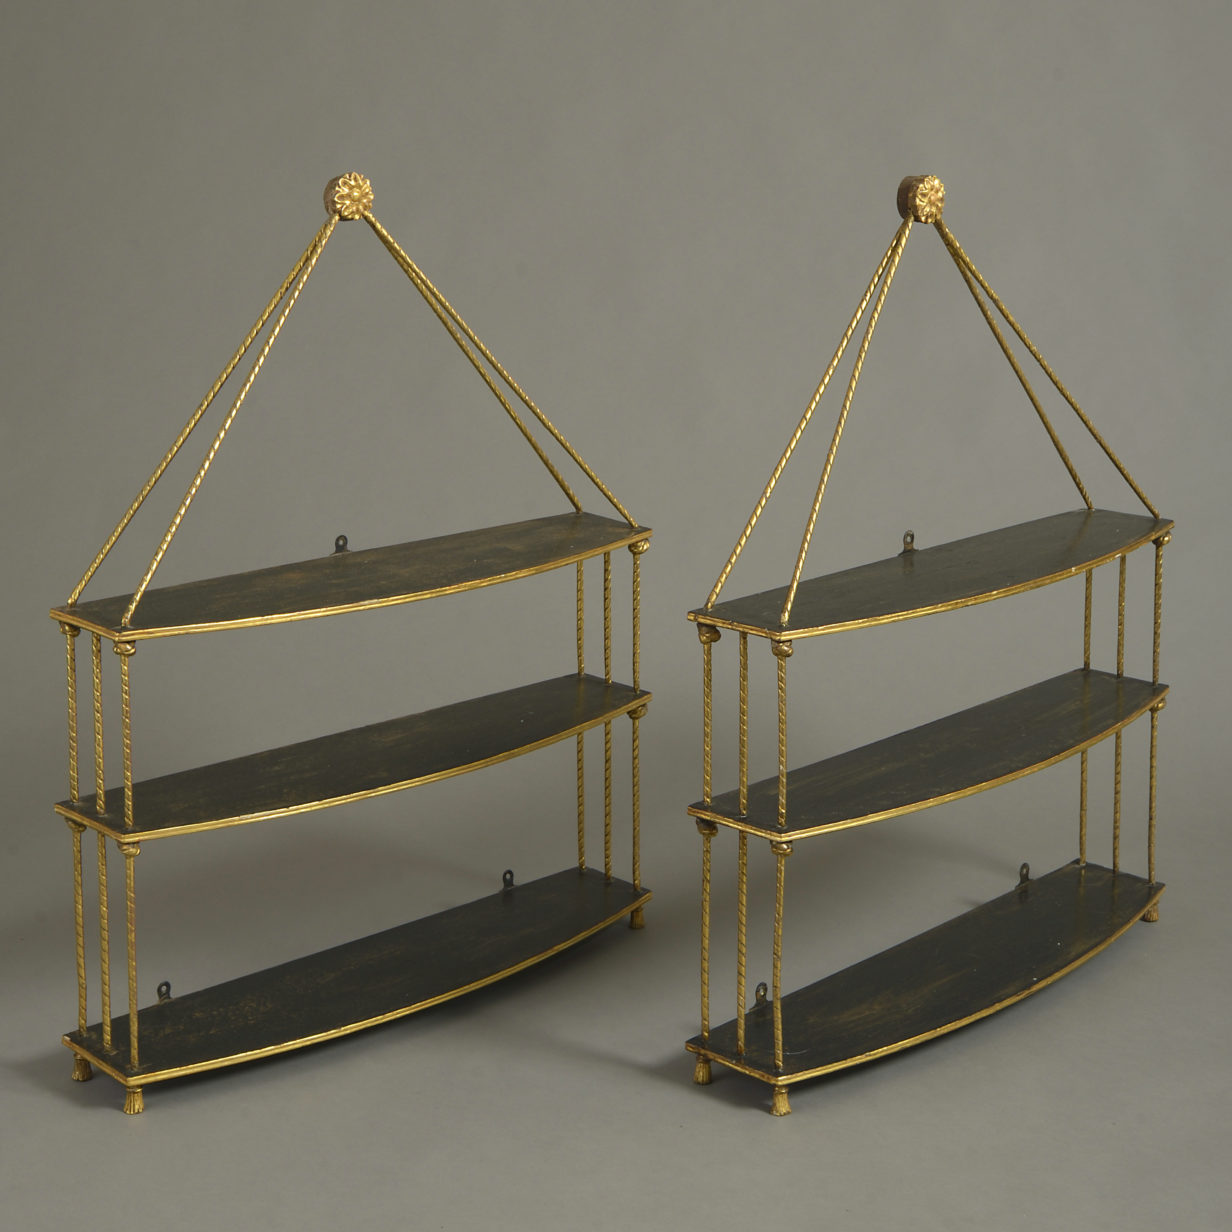 Pair of early 19th century regency hanging shelves